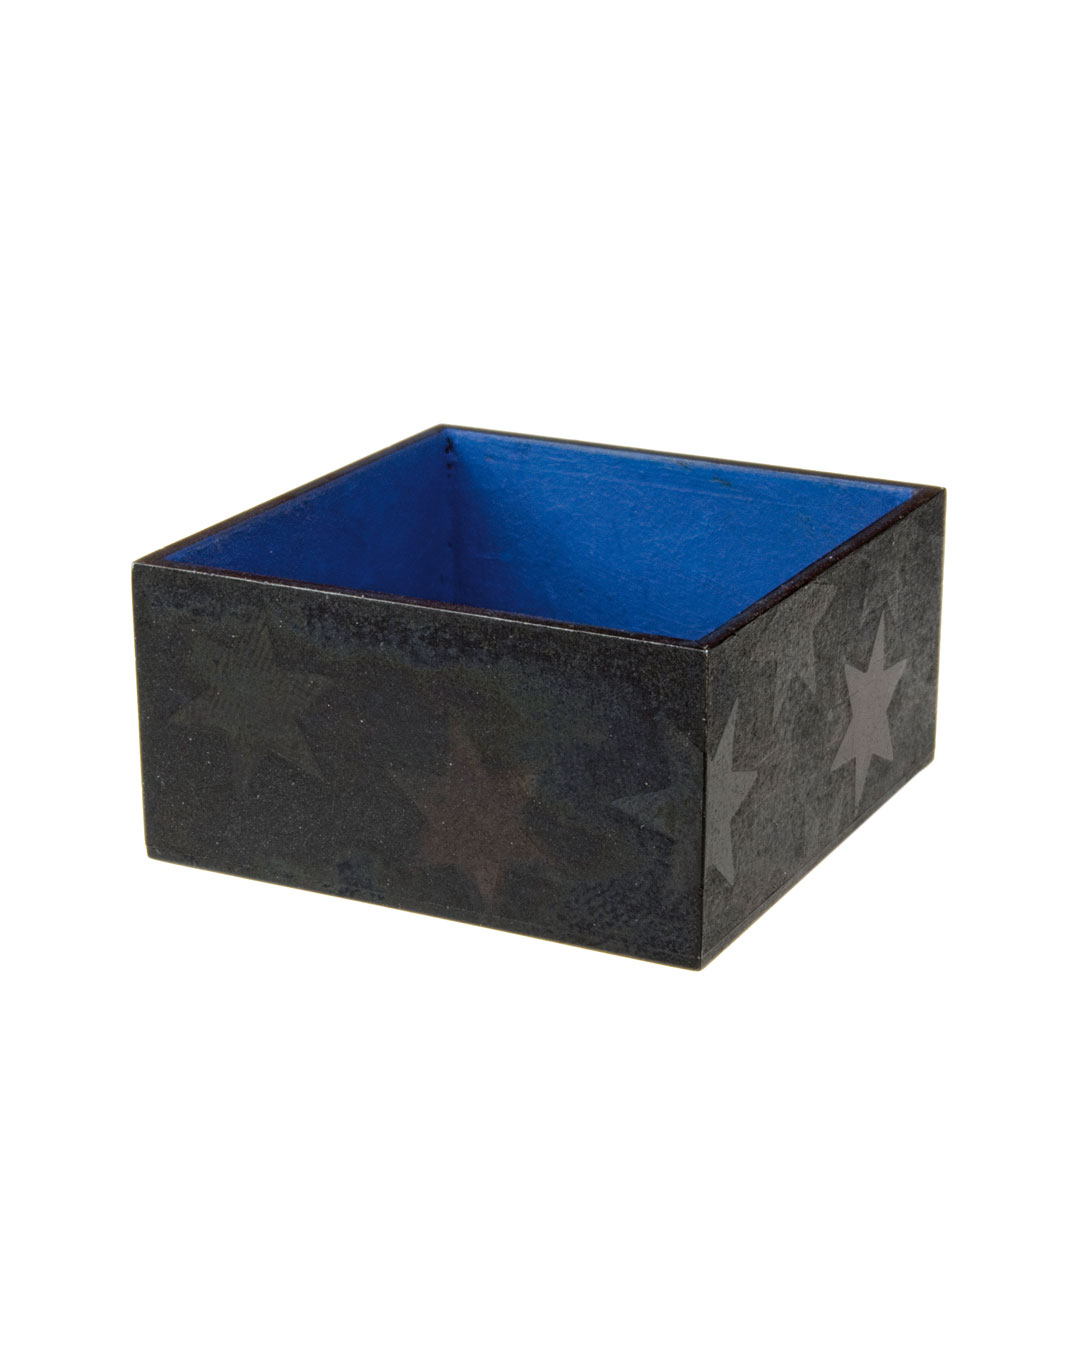 Tore Svensson, Box , 2009, brooch; etched and painted steel, 40 x 40 x 20 mm, €605